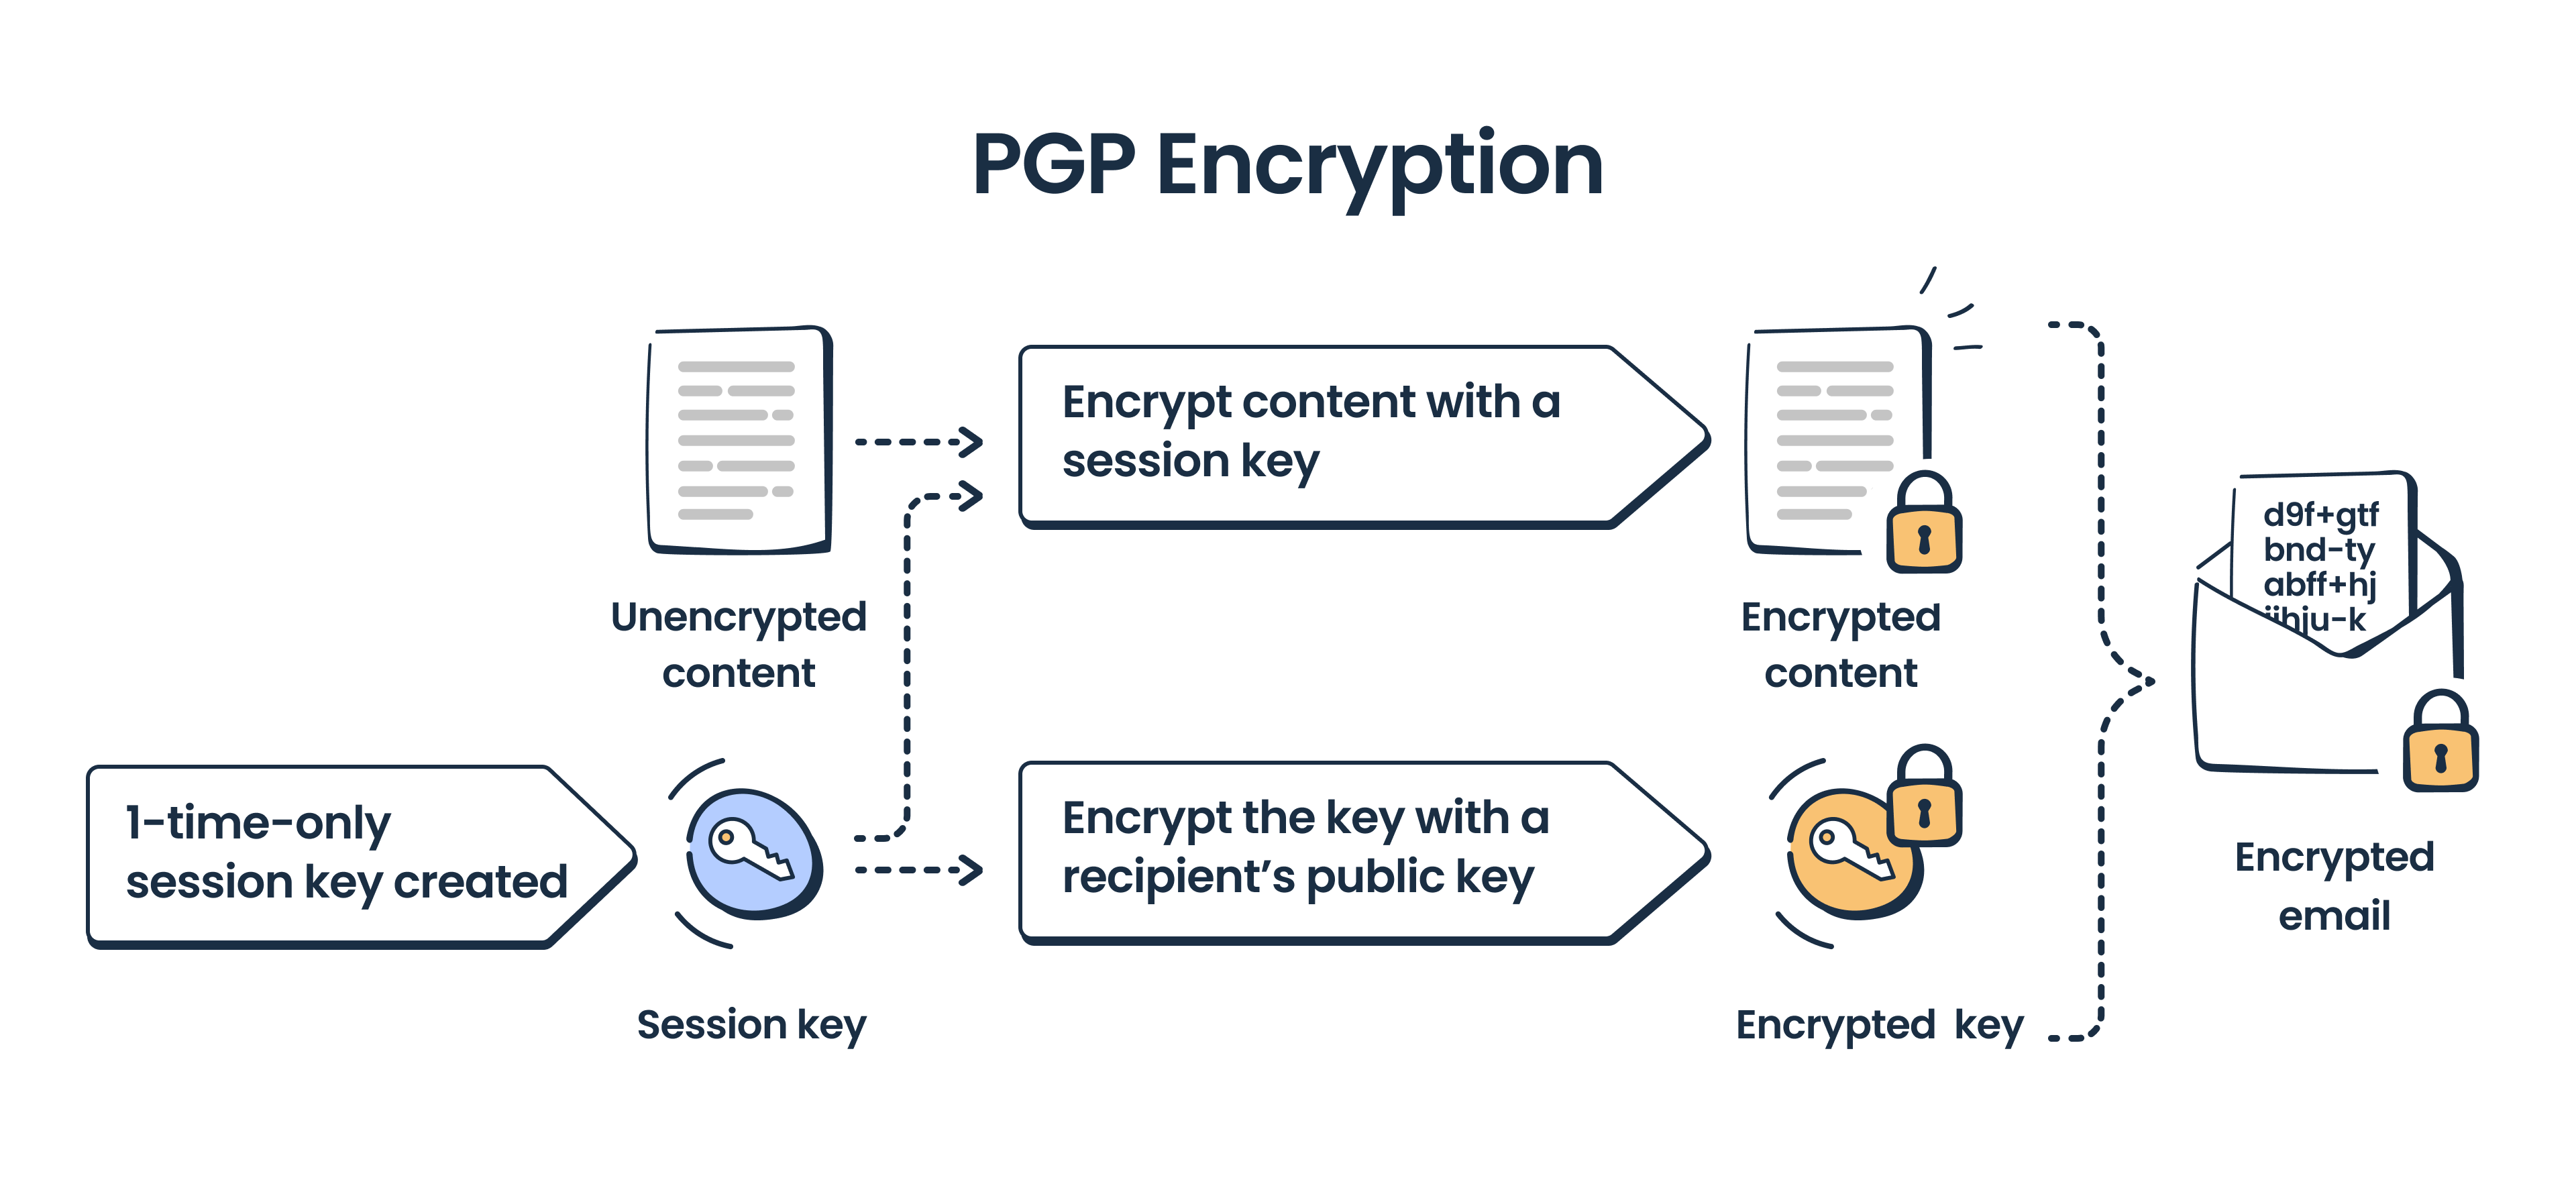 This is an image showing an illustration of PGP encryption 